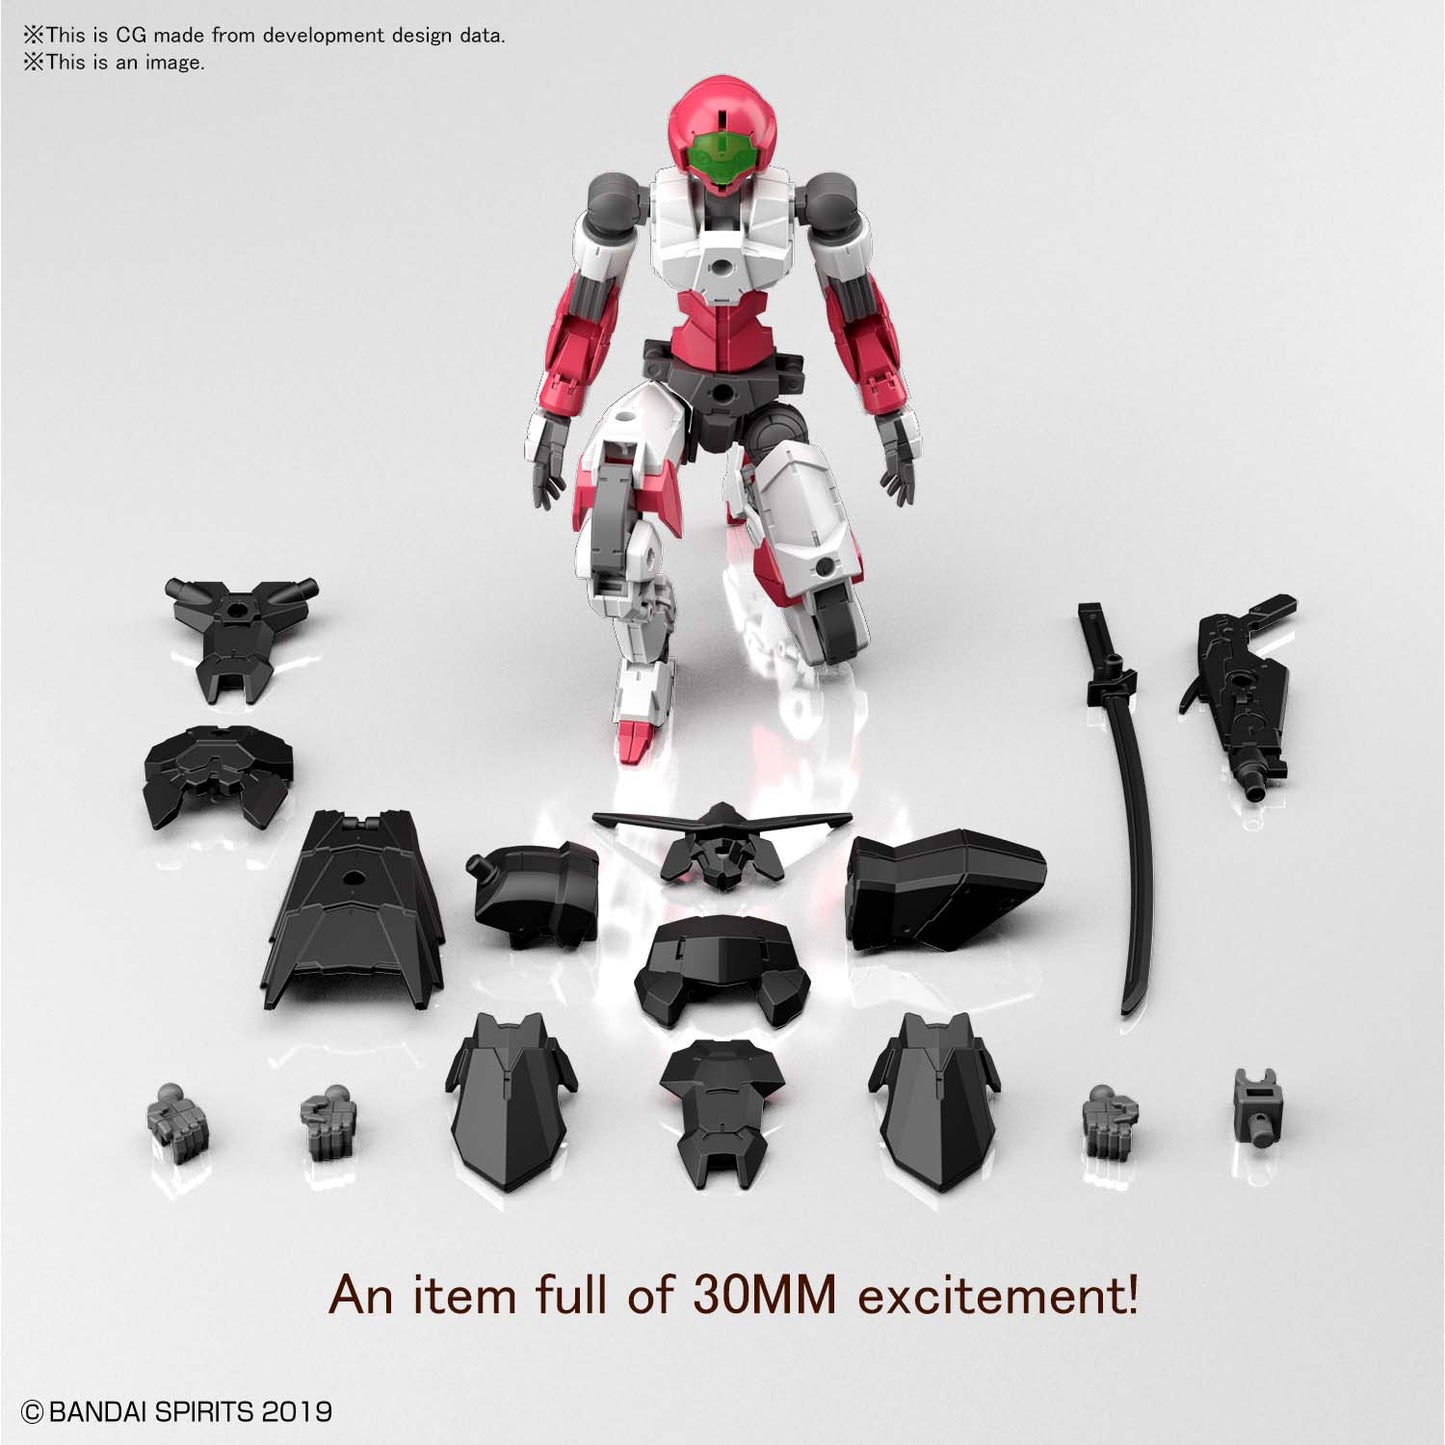 30MM 1/144 EXM-A9s SPINATIO (SENGOKU TYPE) FIRST PRODUCTION LIMITED CUSTOM JOINT SET